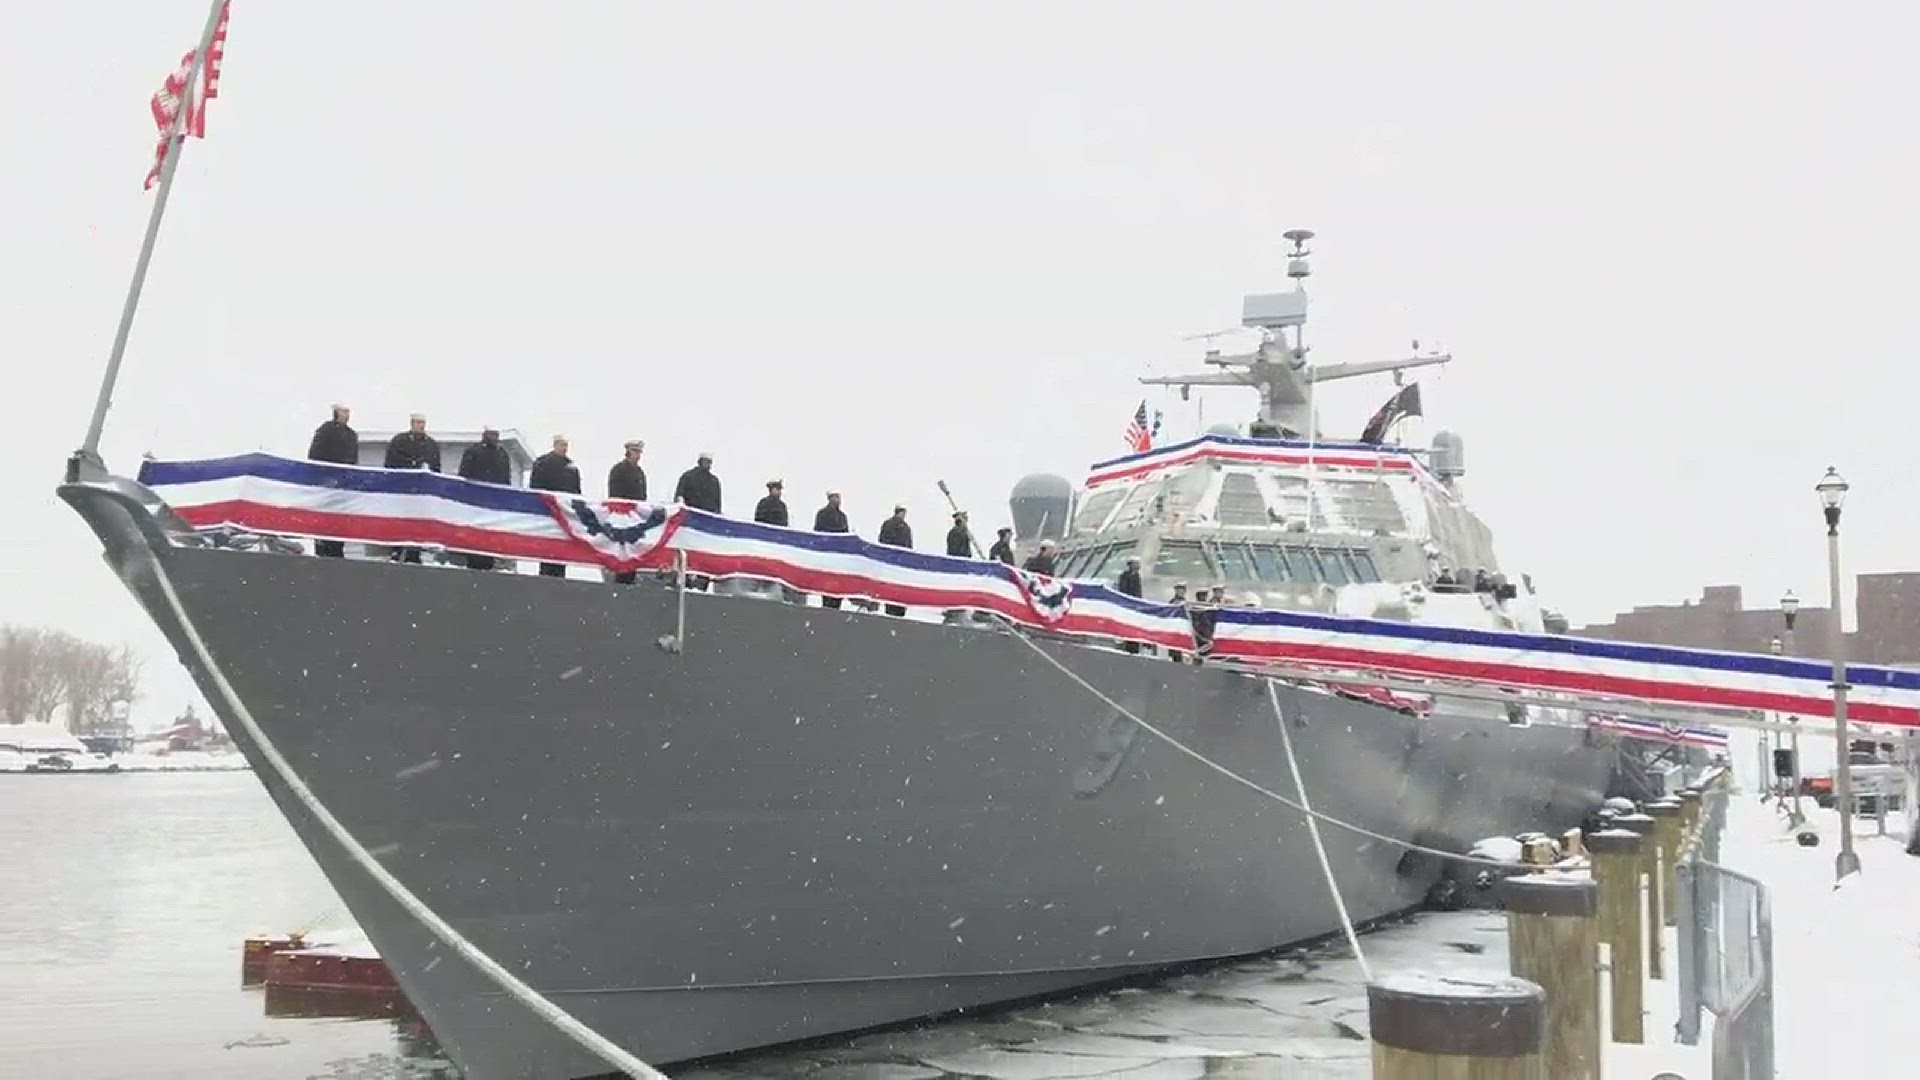 Video from WGRZ photojournalist Ben Read as the crew of the new USS Little Rock salutes during the commissioning ceremony.